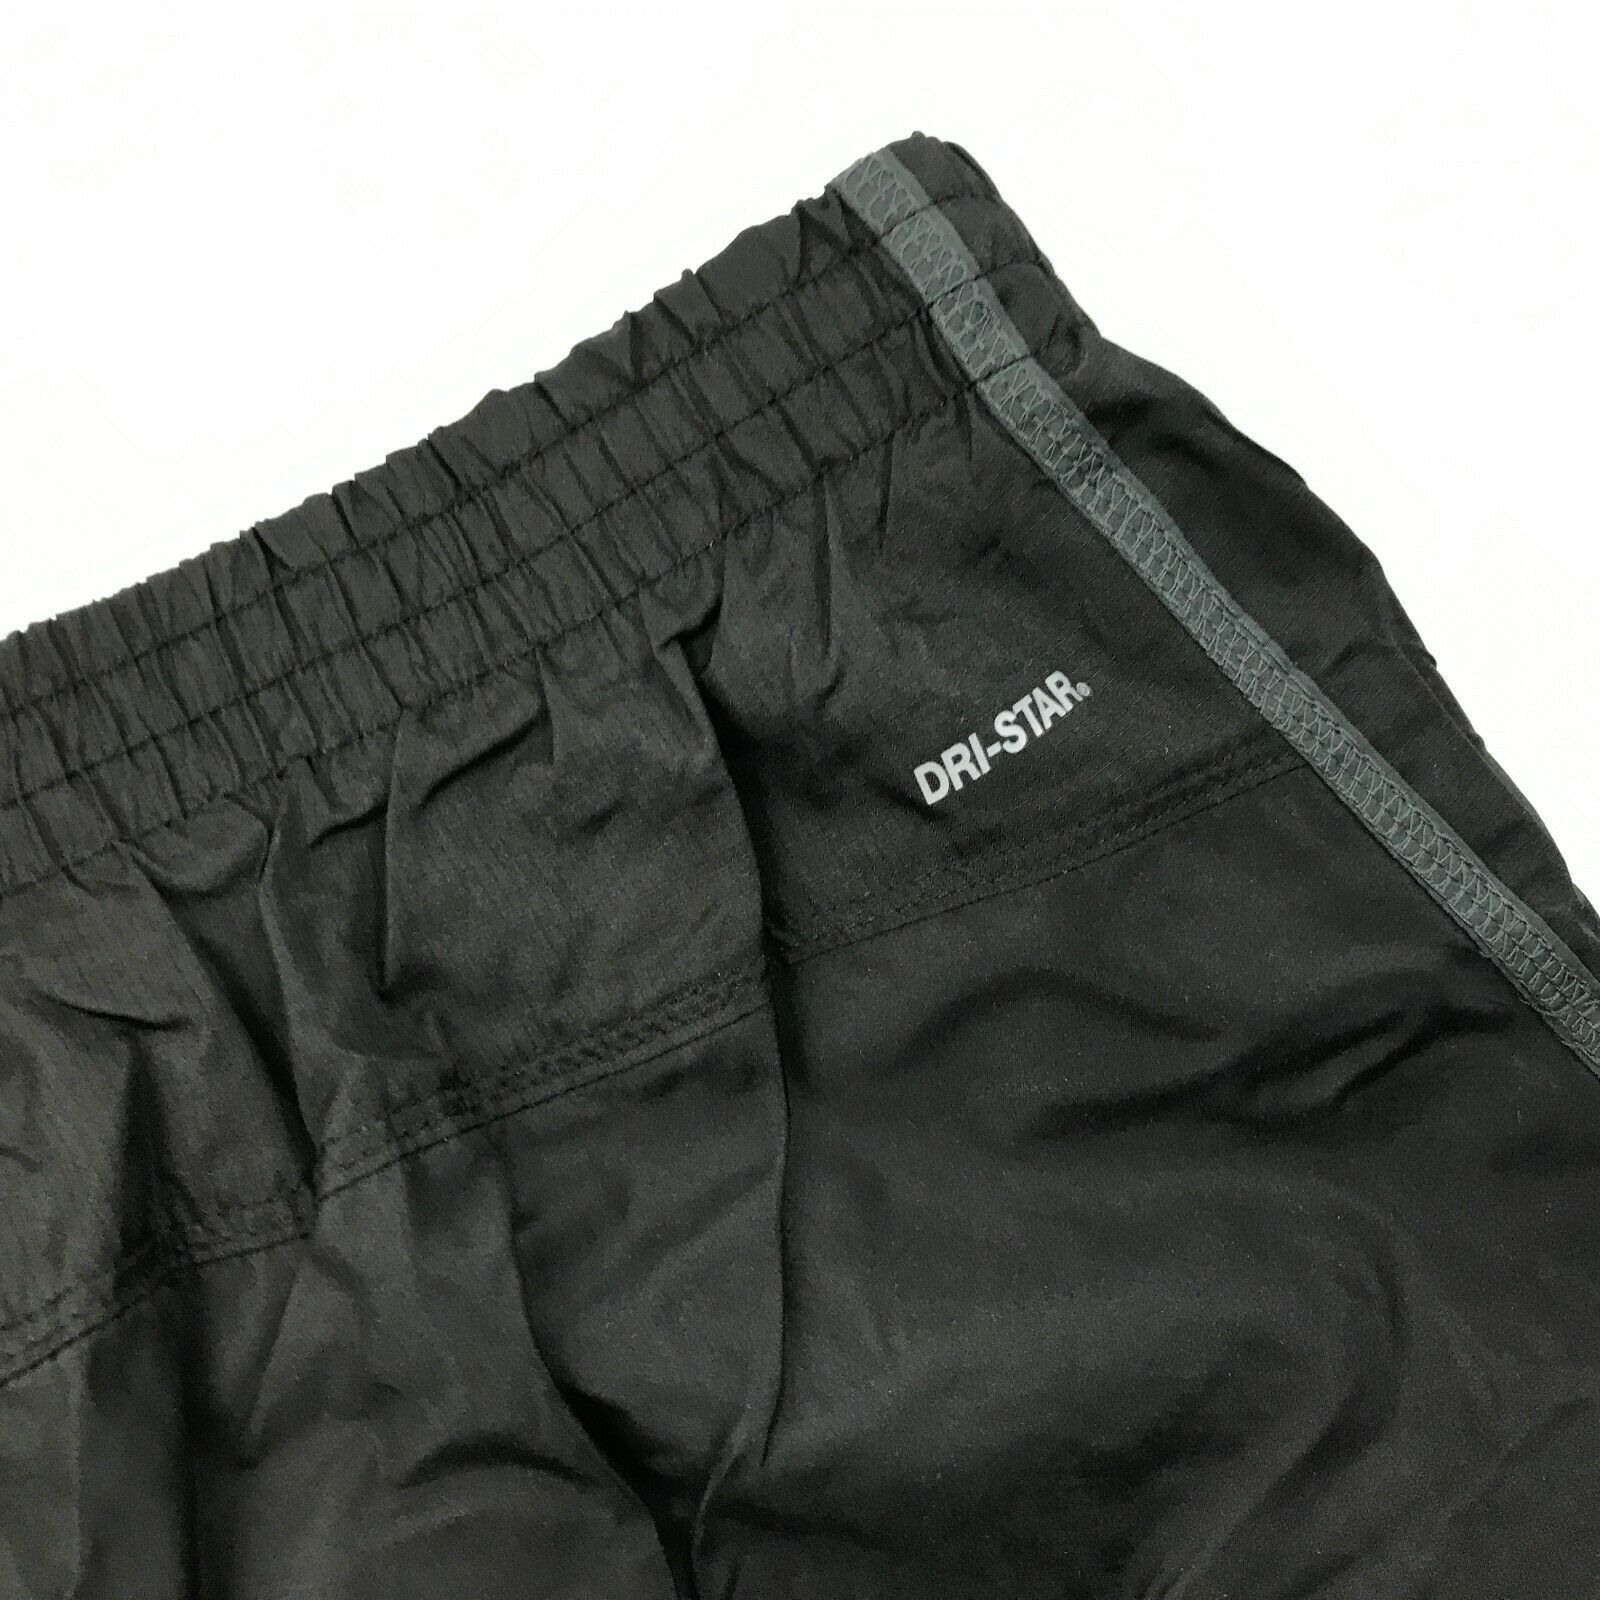 Starter Running Pants Size L 36 - 38 Mesh Lined Reflective Pant Zip ...